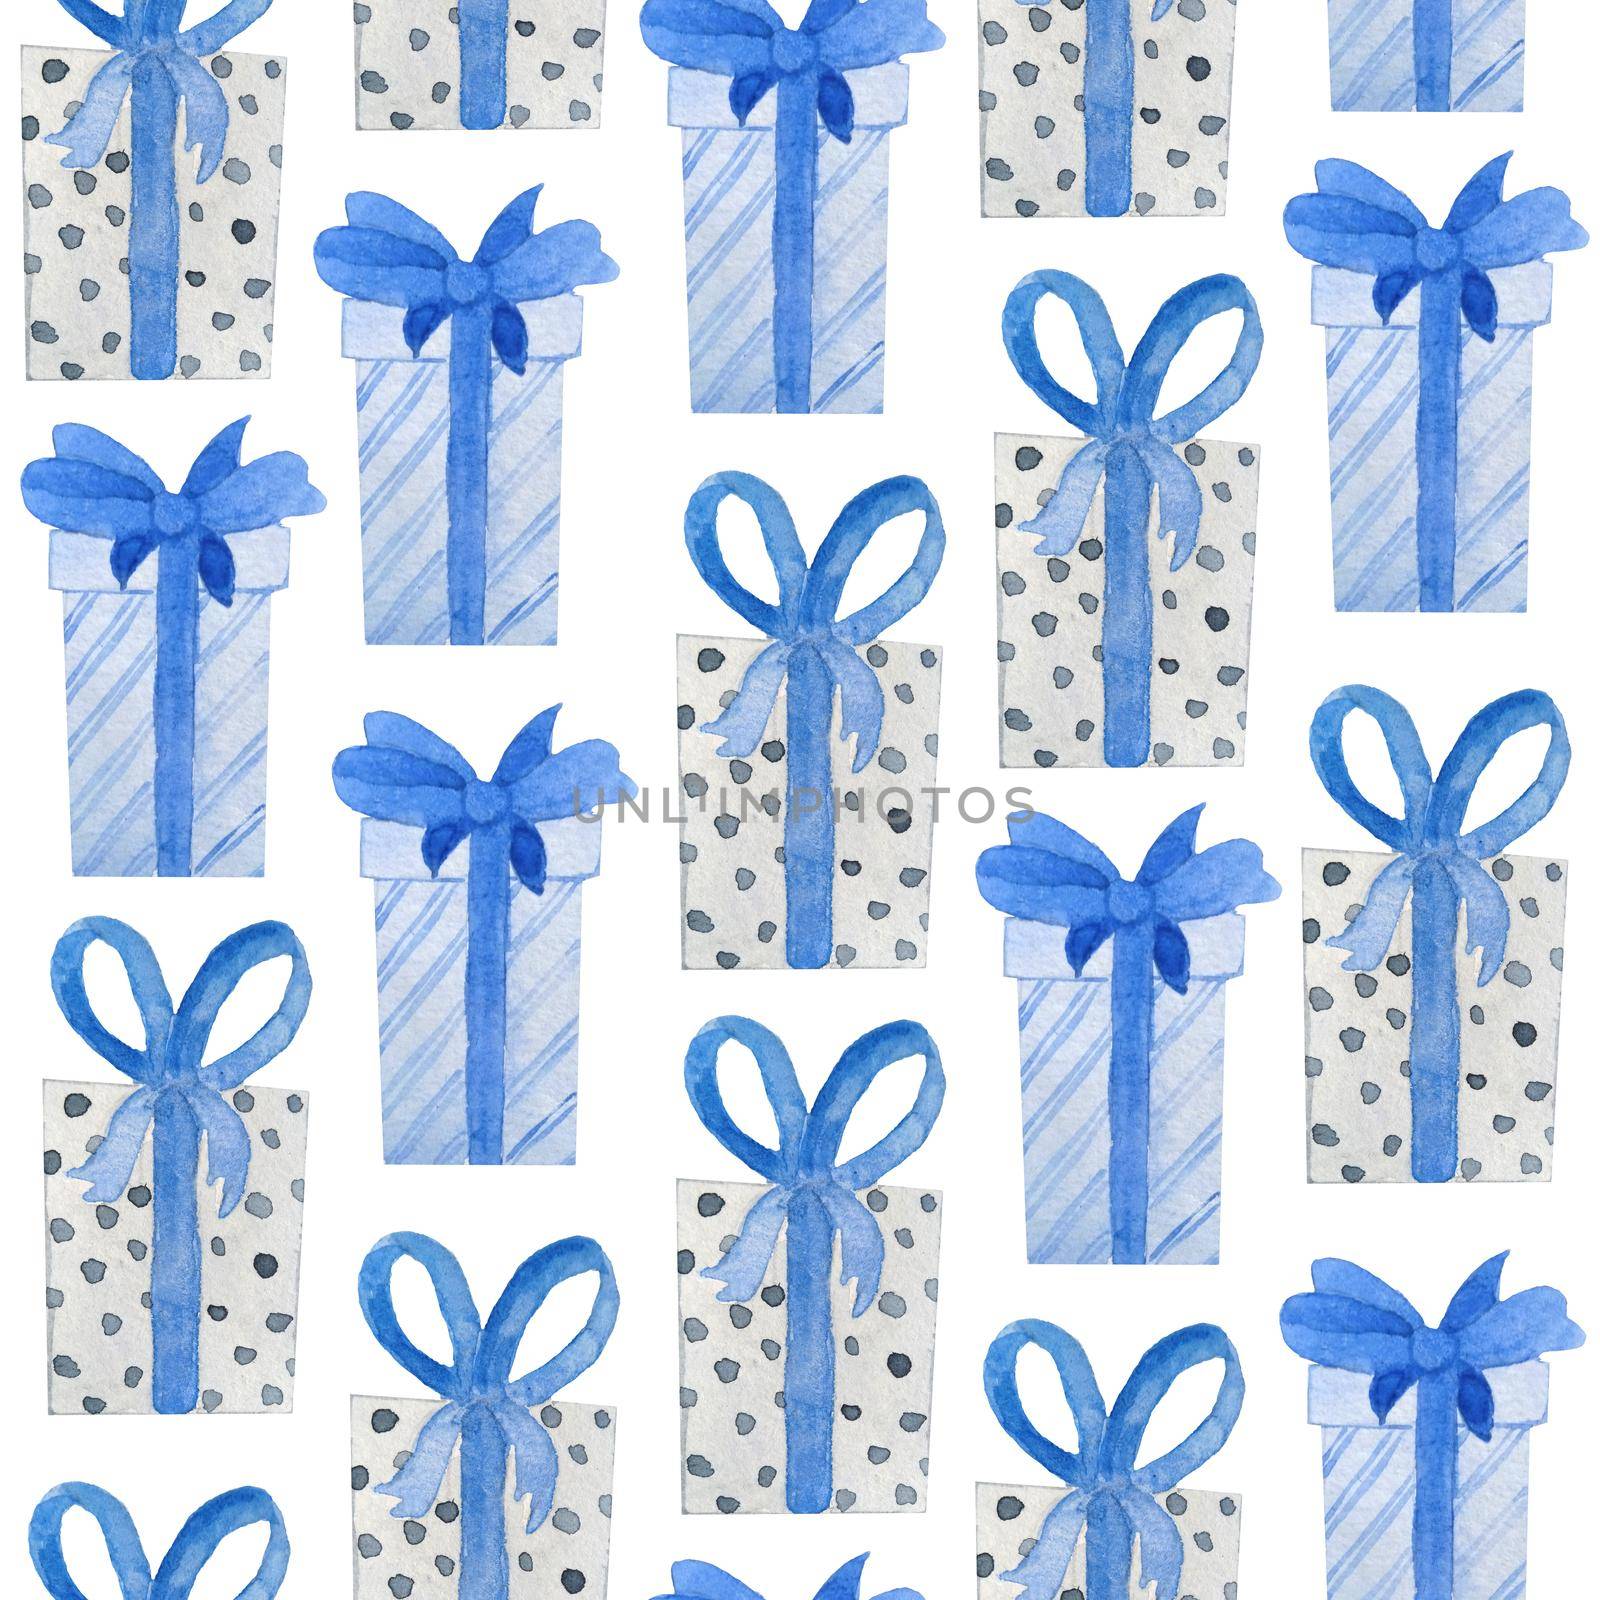 Watercolor seamless hand drawn pattern with blue grey christmas gifts in decor wrapping paper with bows. Nordic scandinavian neutral colors for new year celebration cards background. Box with shiny ribbon. by Lagmar